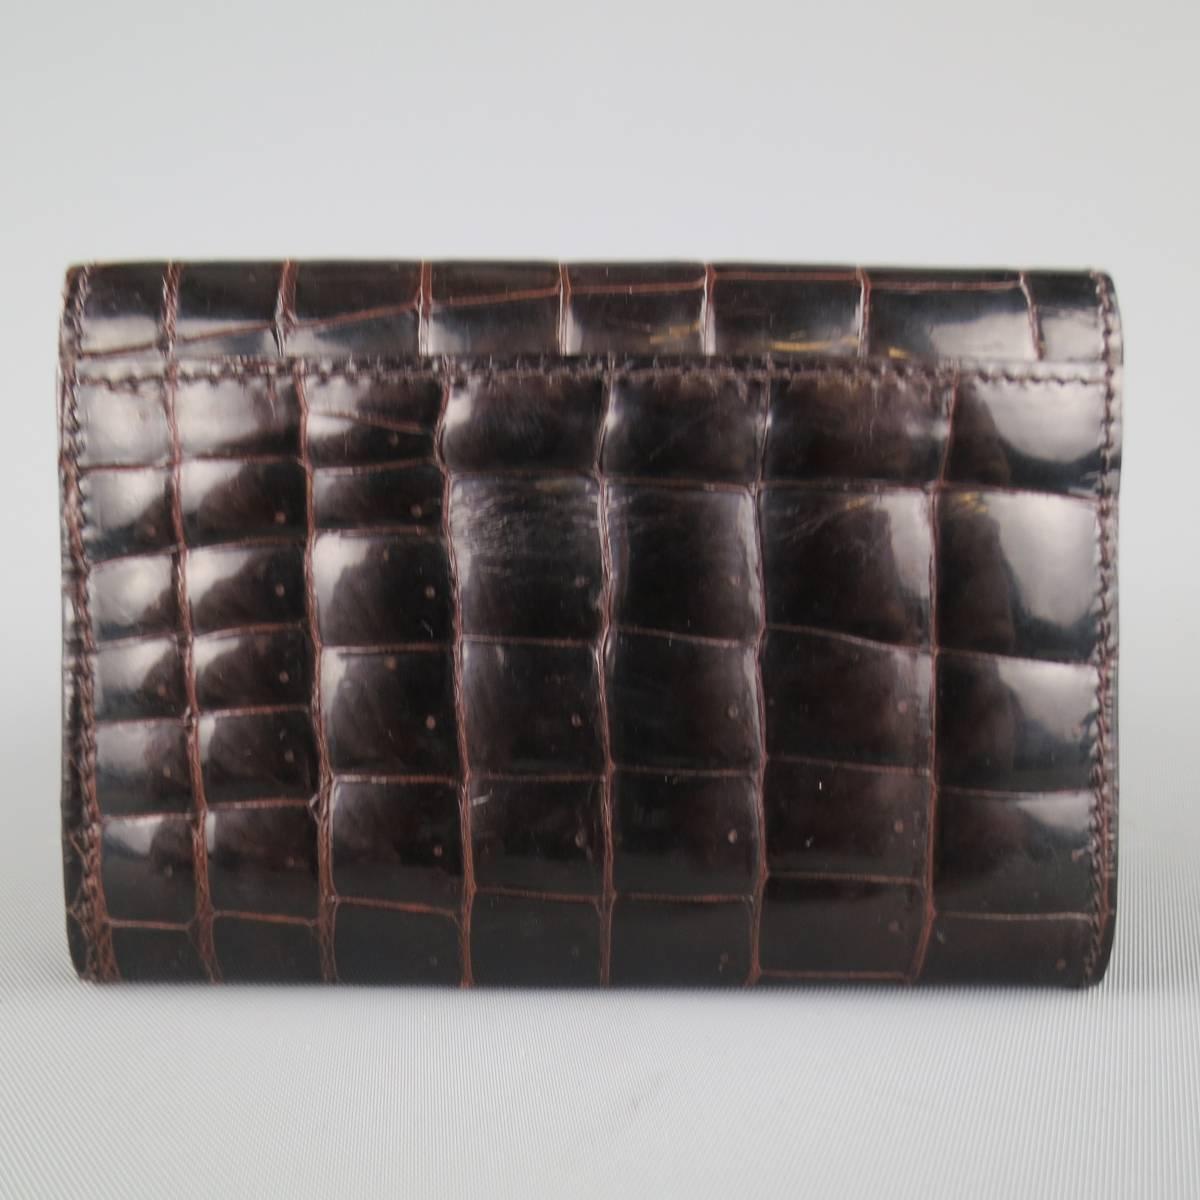 BOTTEGA VENETA card hold wallet in a chocolate brown high shine alligator crocodile textured leather featuring a snap flap closure. With dust bag. Made in Italy.
 
Good Pre-Owned Condition.
 
4.25 x 3 in.


Web ID: 80794 
